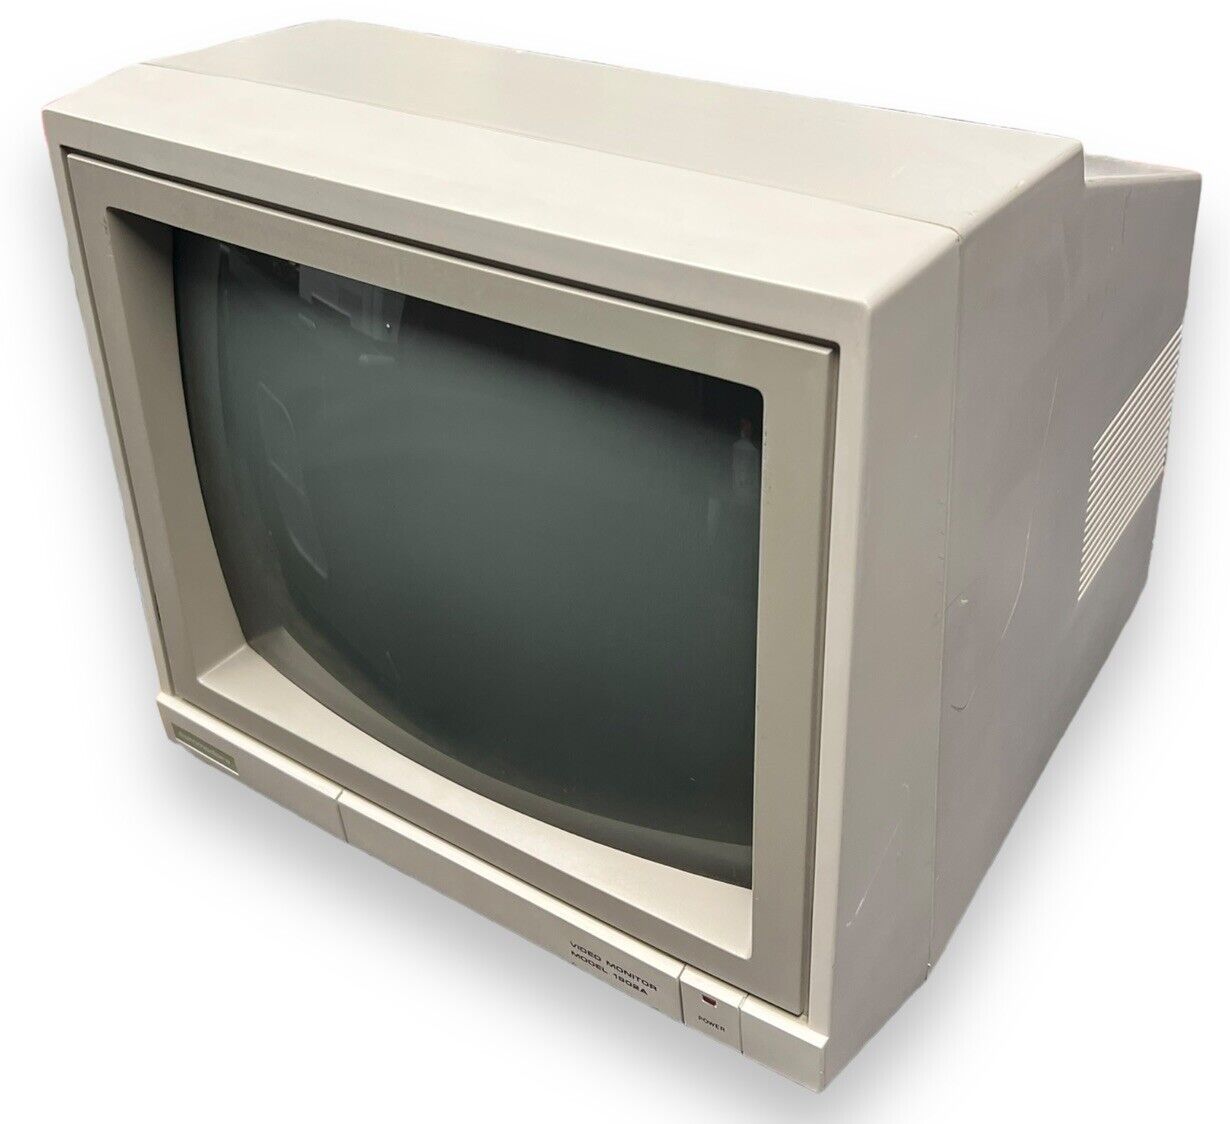 Commodore 1902 Color Display Video Computer Gaming Monitor - POWERS ON